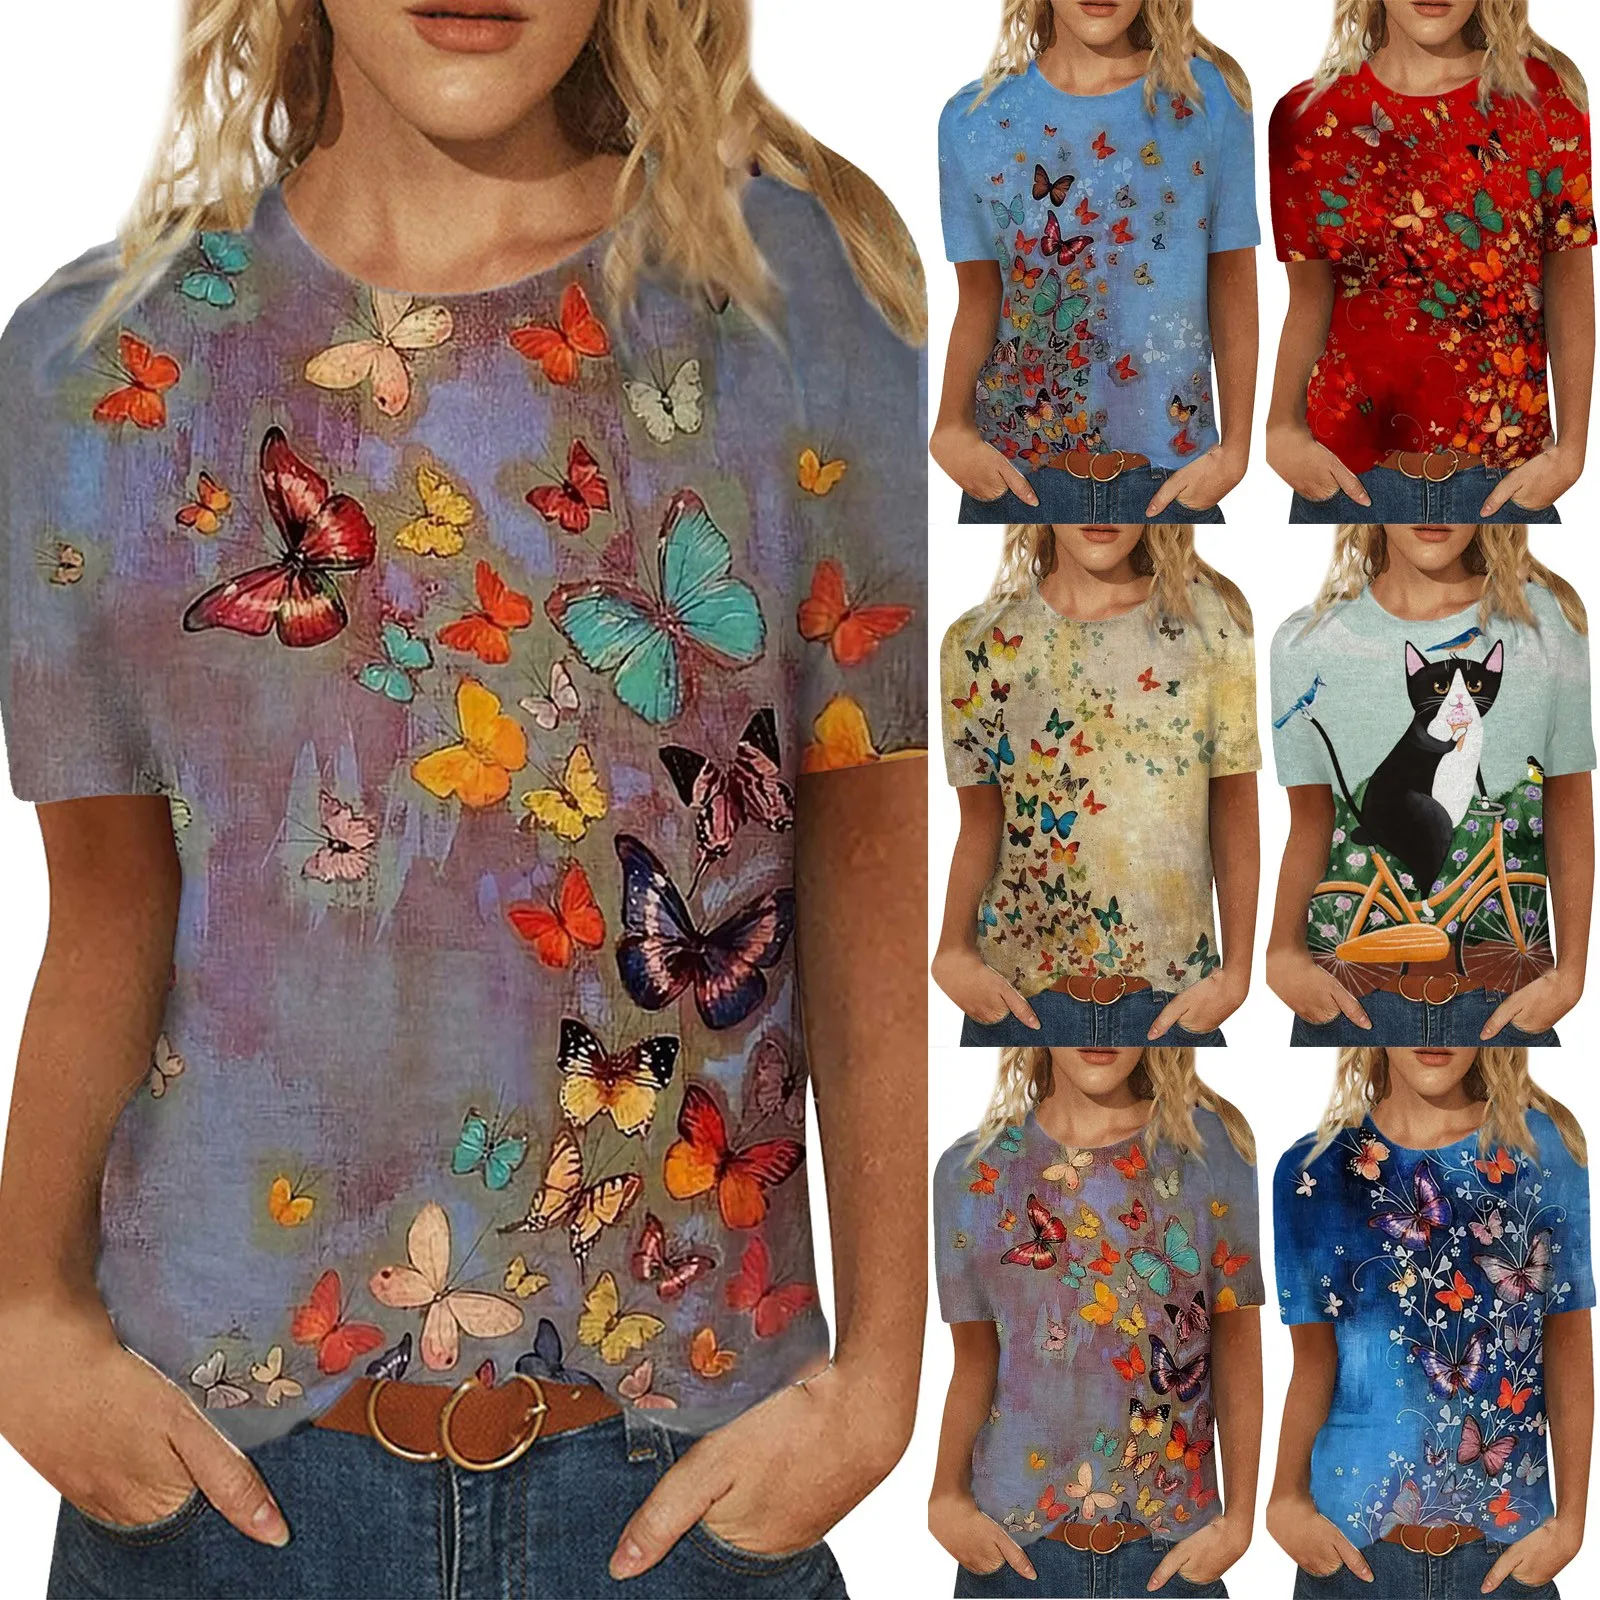 Womens Tops Graphic Tees Butterfly Print T-Shirt Casual Blouse Short Sleeve Shirt Ladies Elegant Pullover Tee Top 